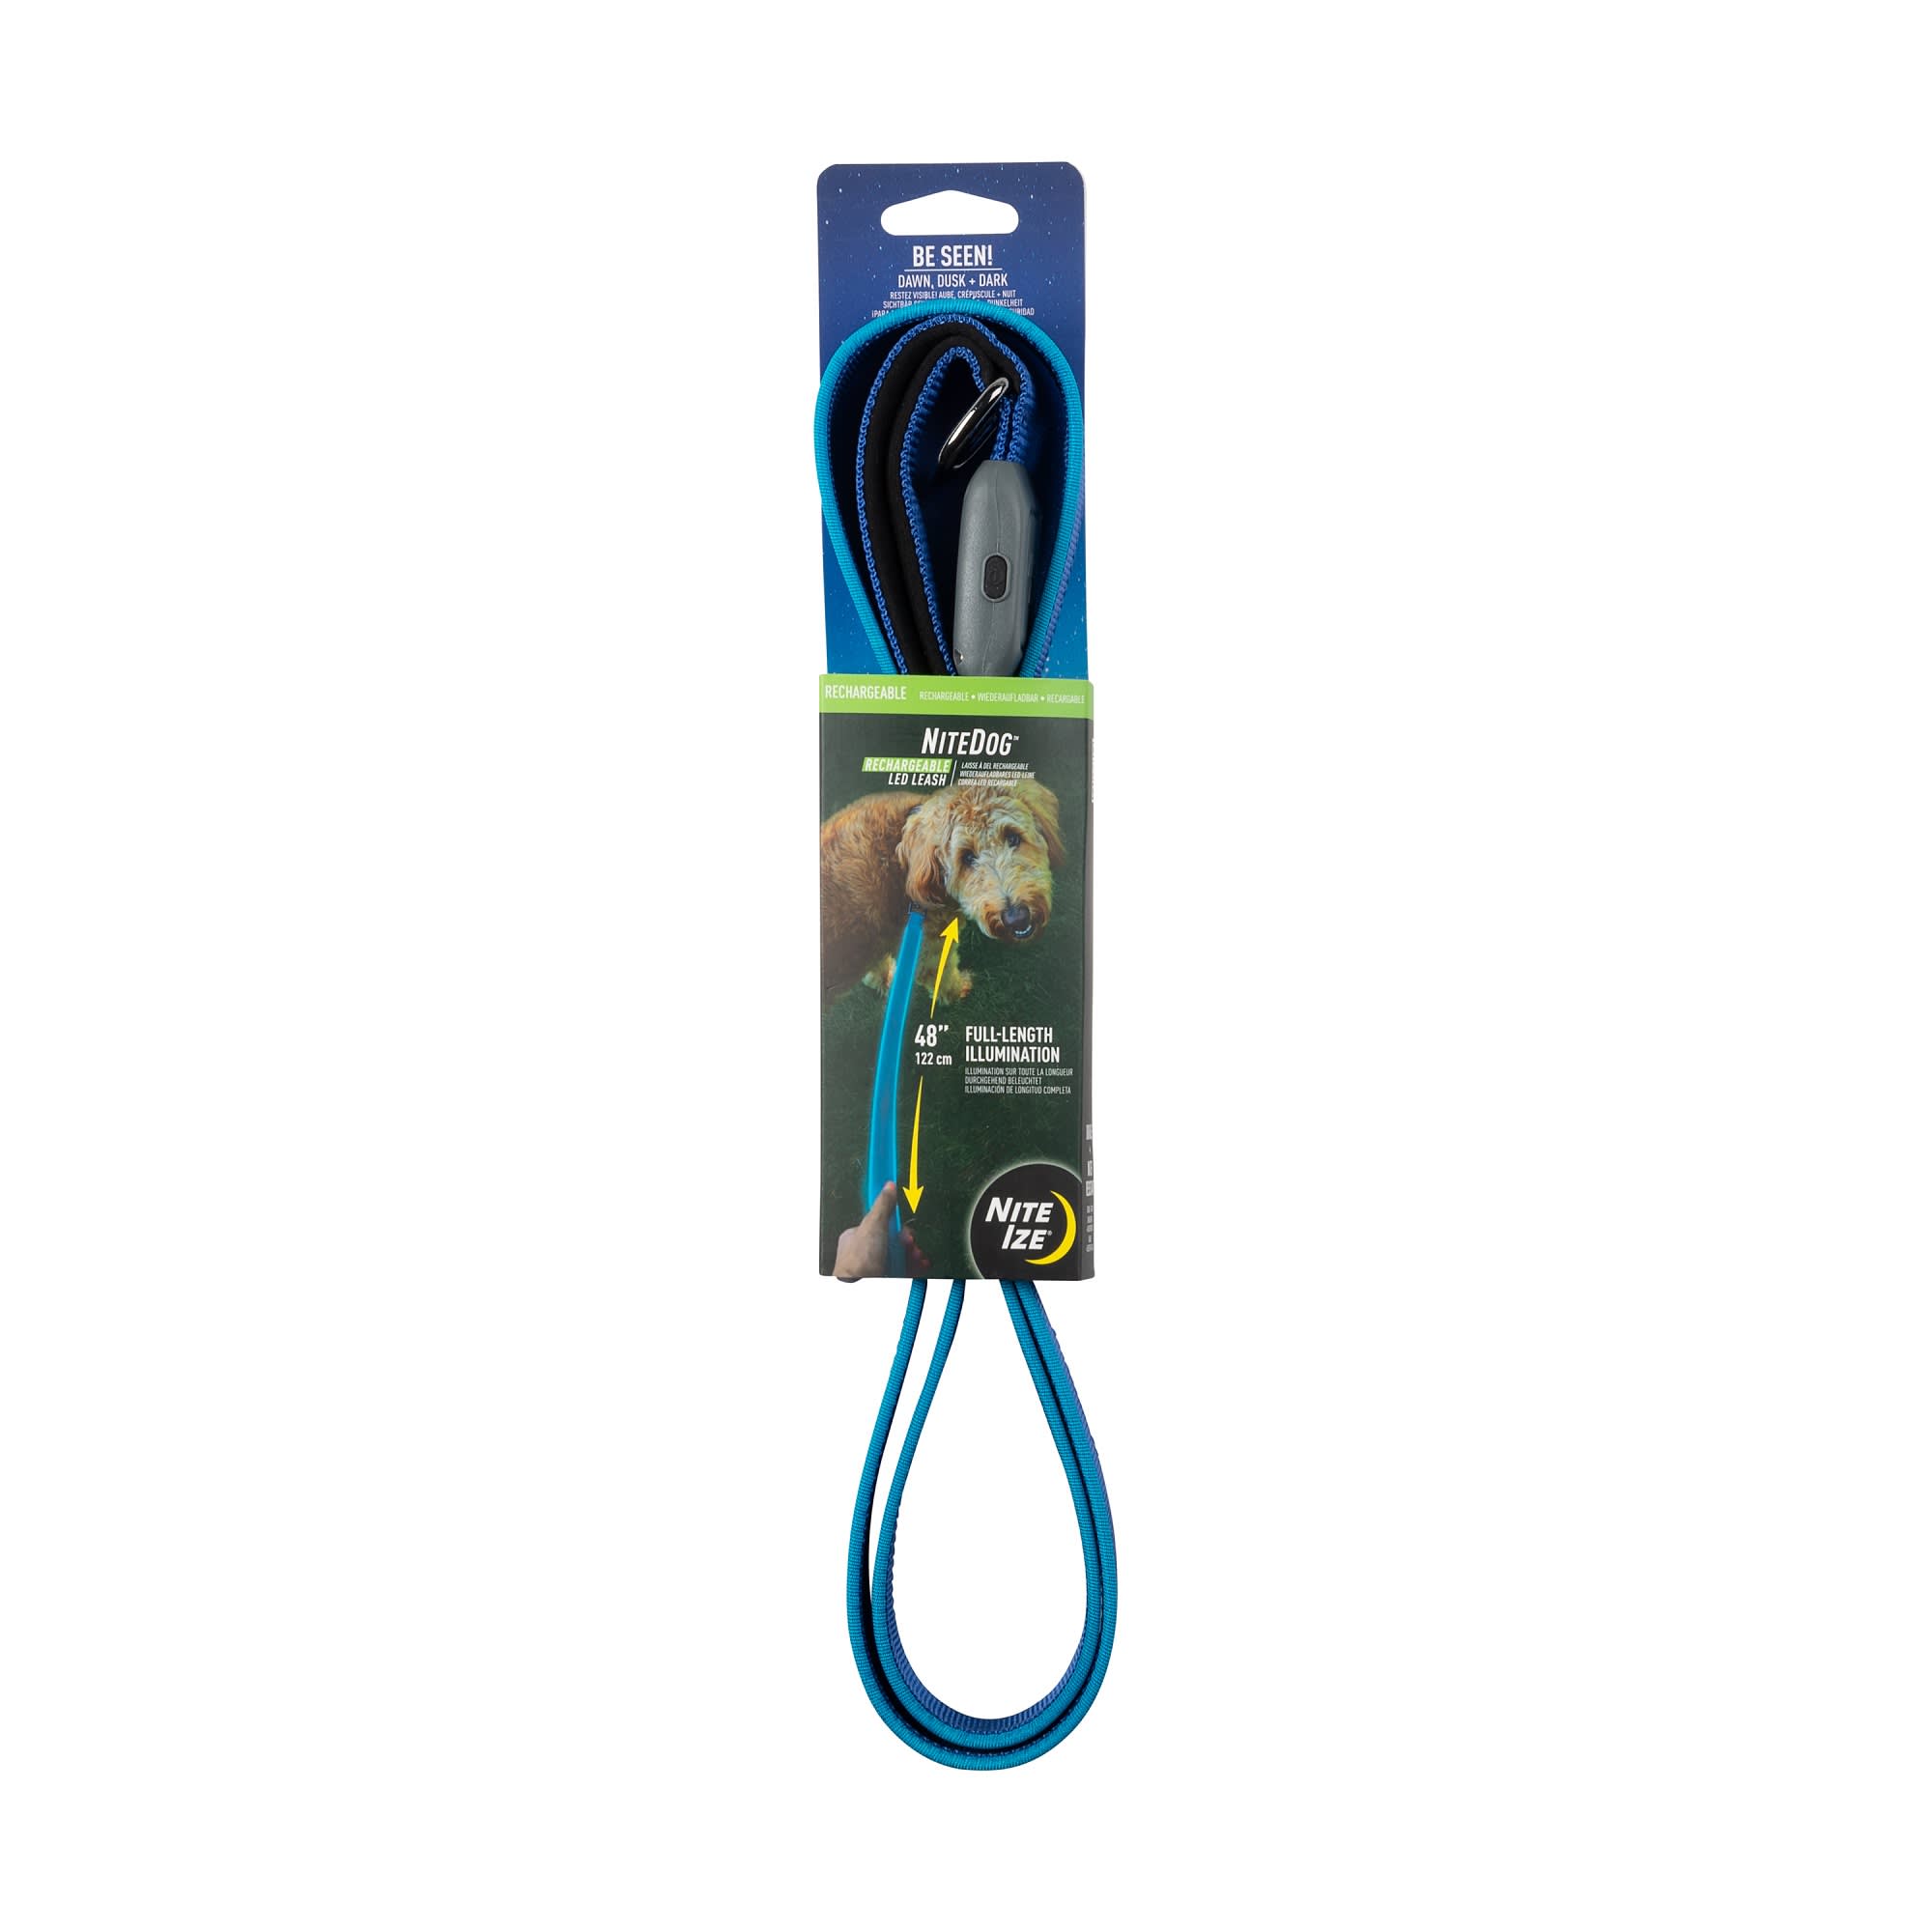 Photos - Collar / Harnesses Nite Ize NiteDog Blue Rechargeable LED Dog Leash, One Size Fits A 